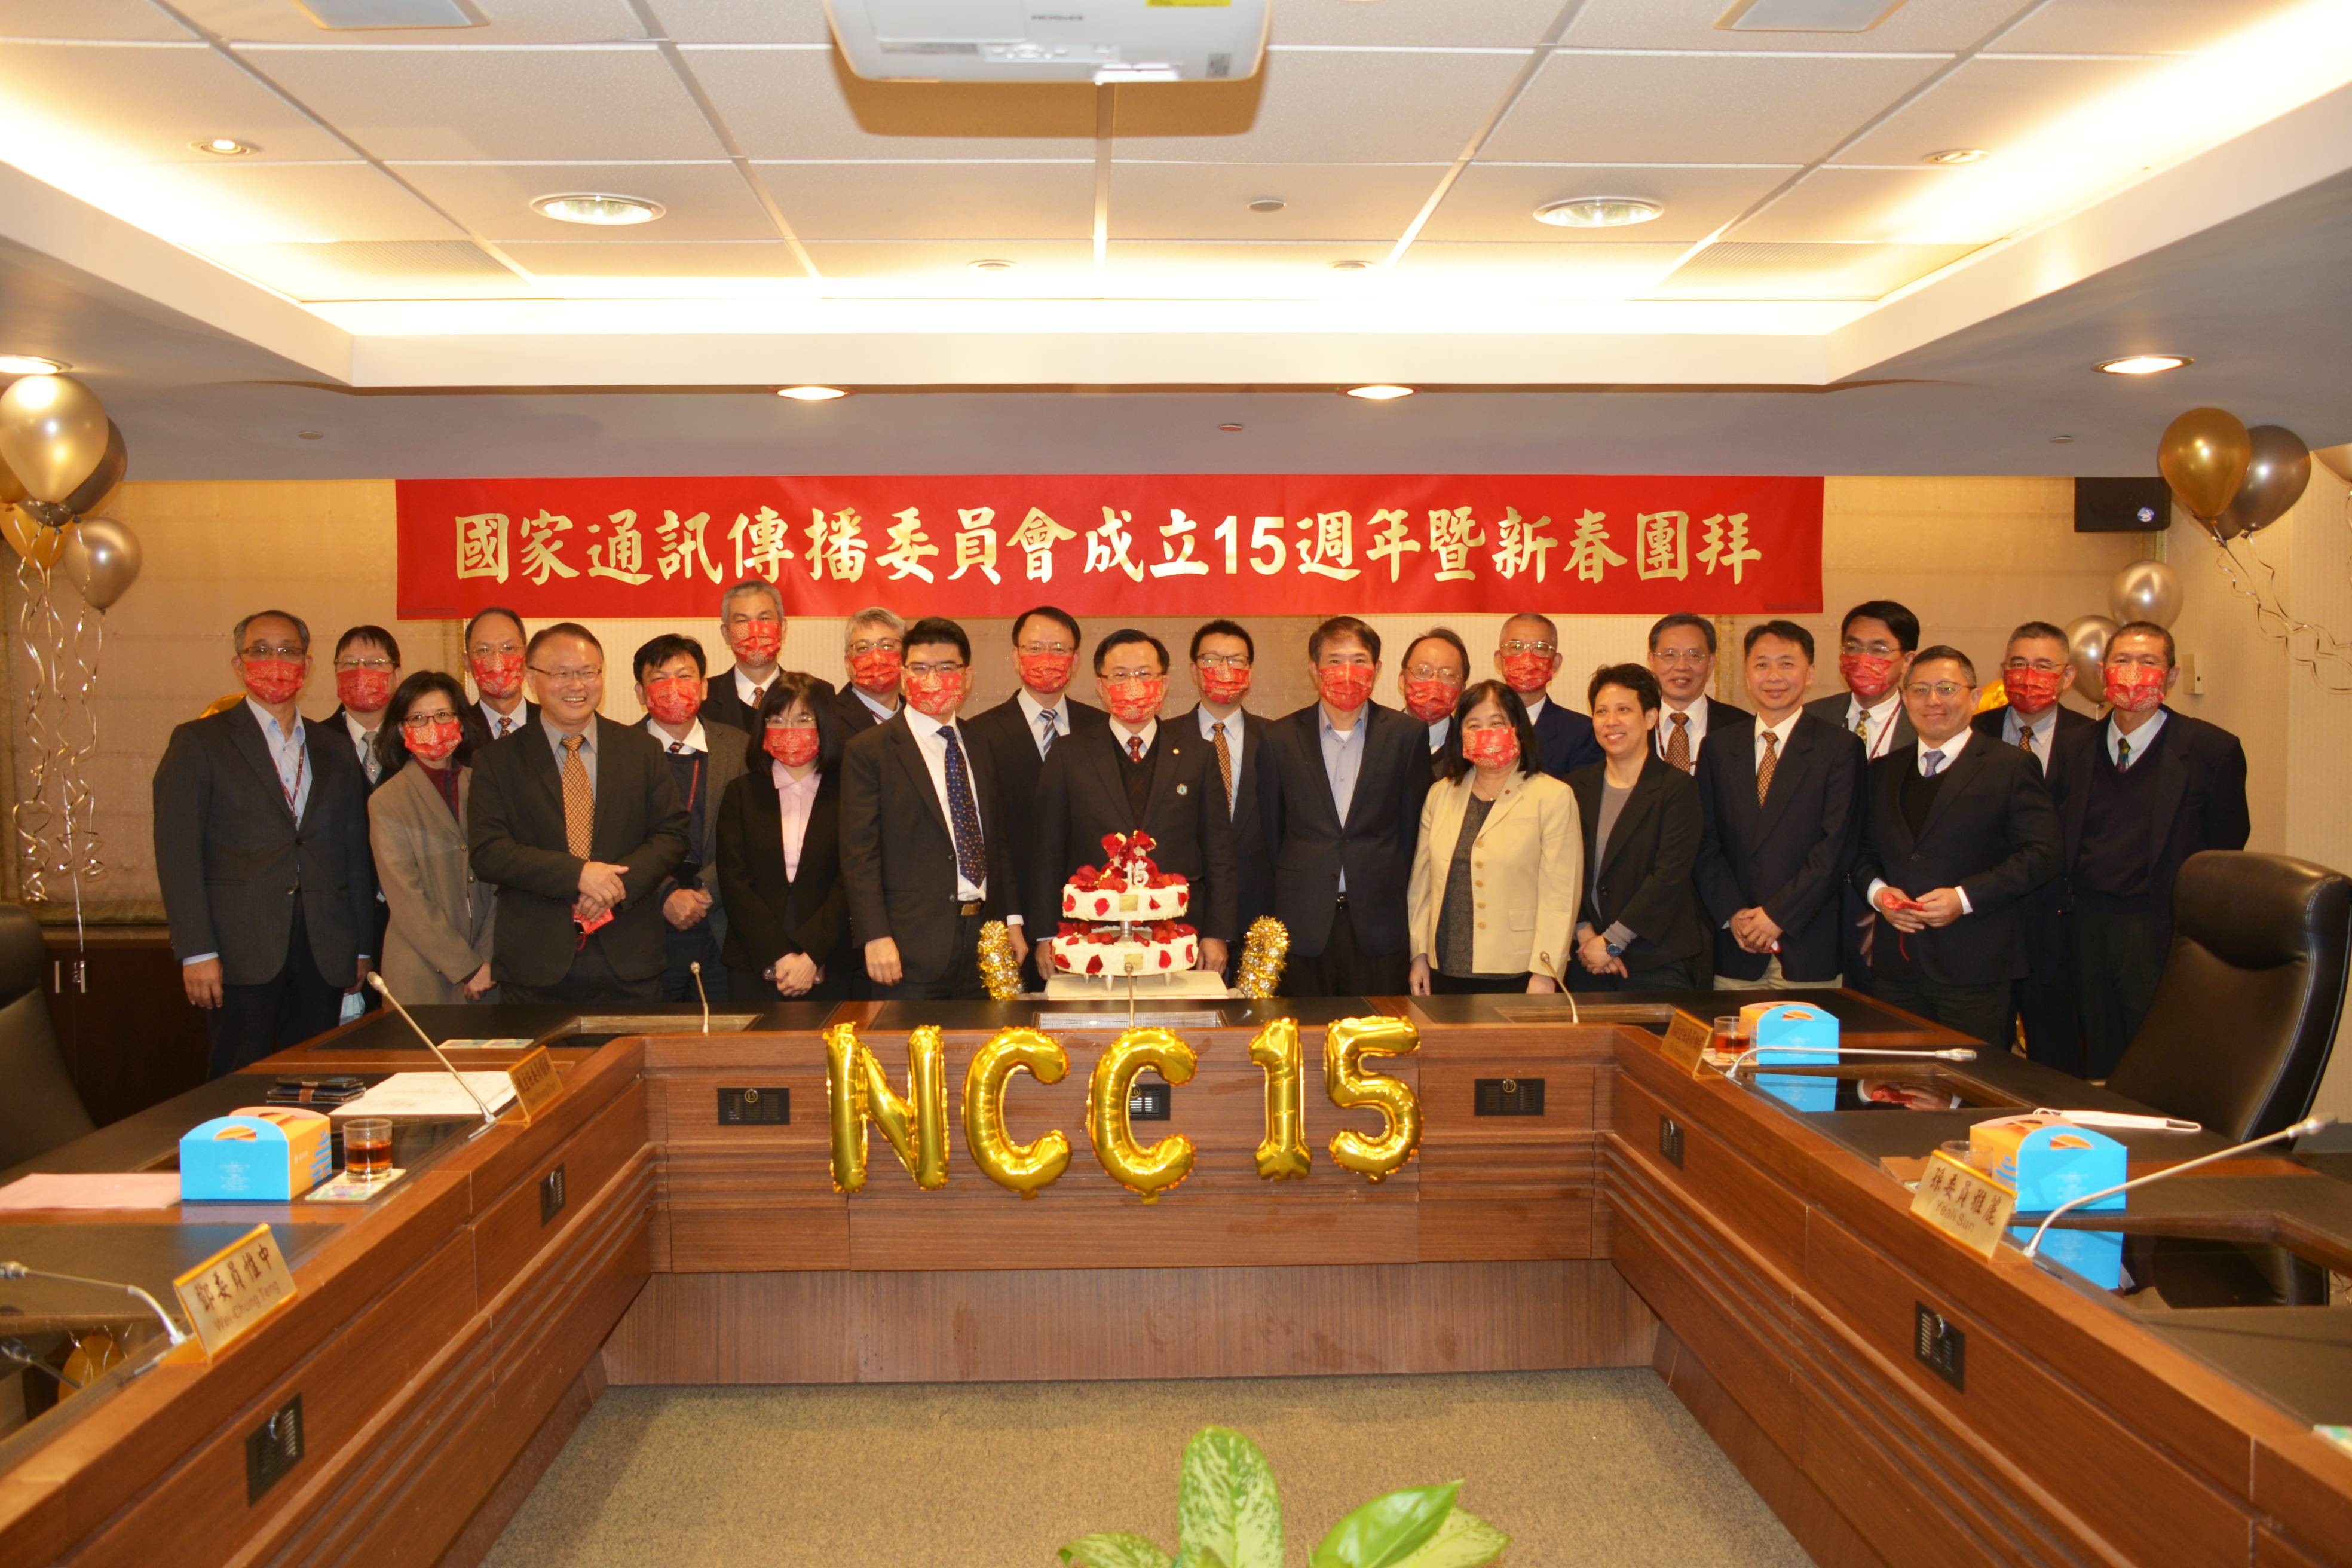 A group photo from NCC commissioners and department officials in the NCC’s 15th anniversary.